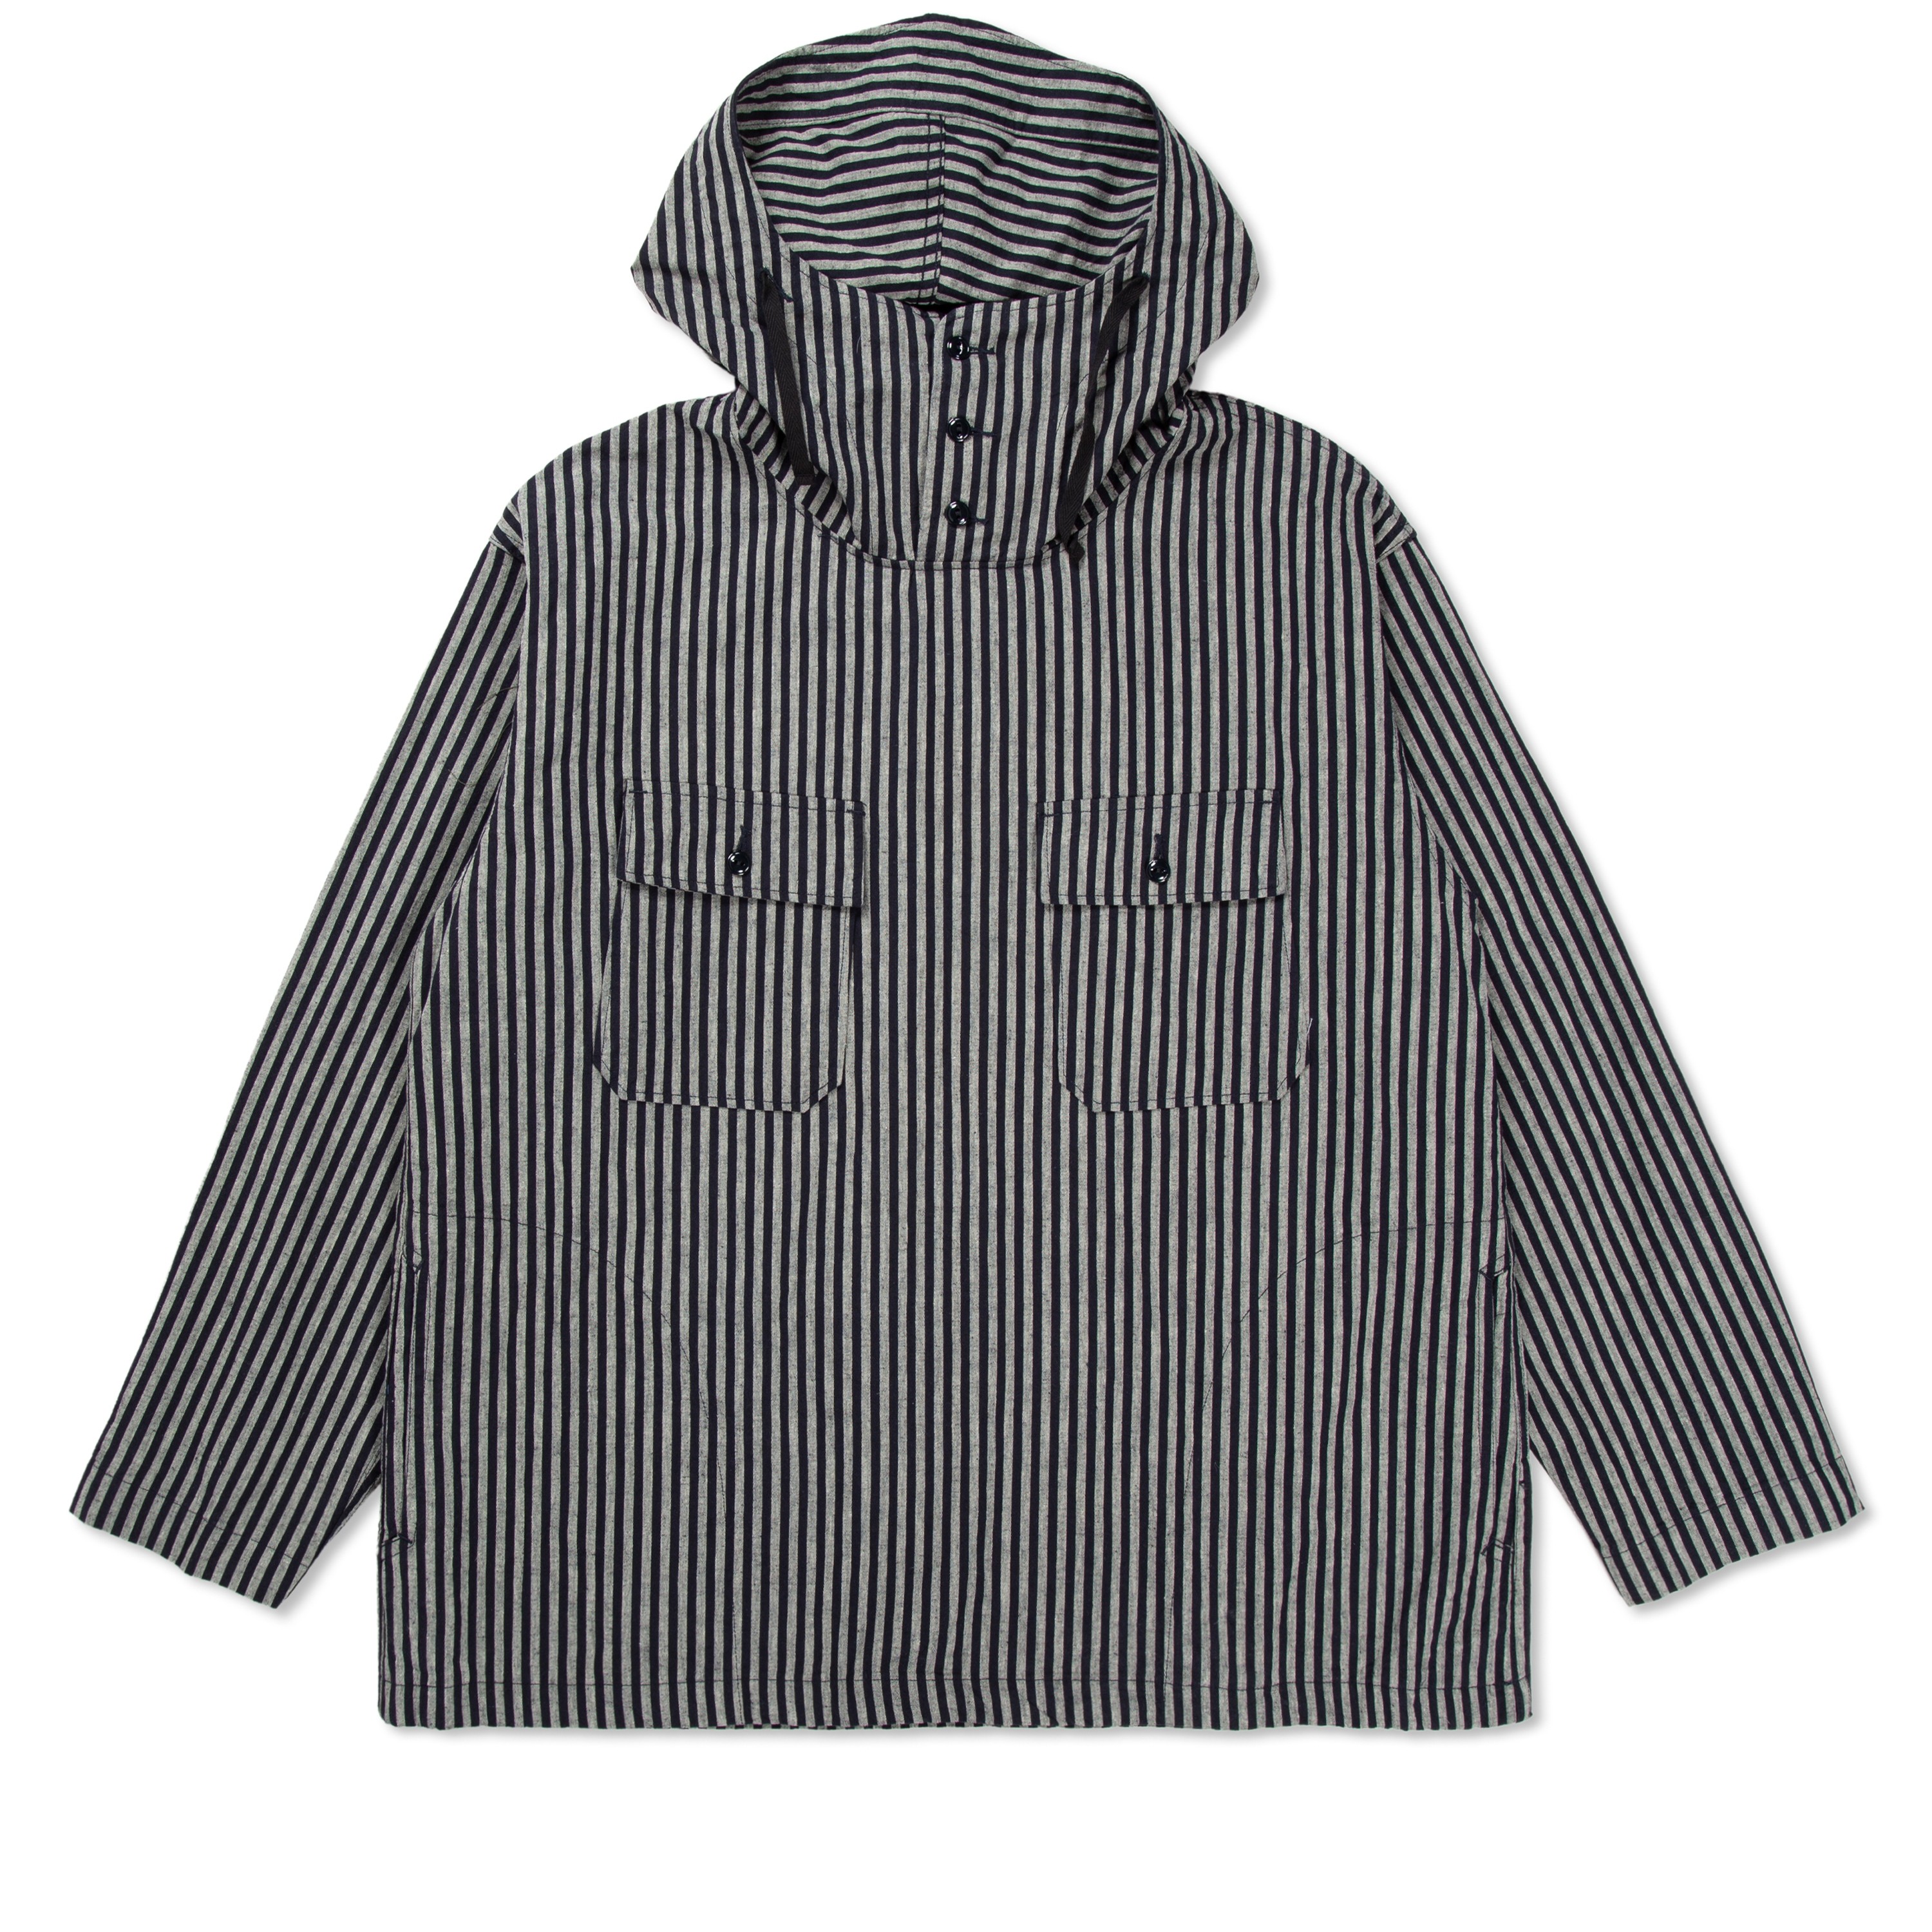 Engineered Garments Cagoule Shirt (Navy/Grey LC Wide Stripe) - 22F1A010 ...